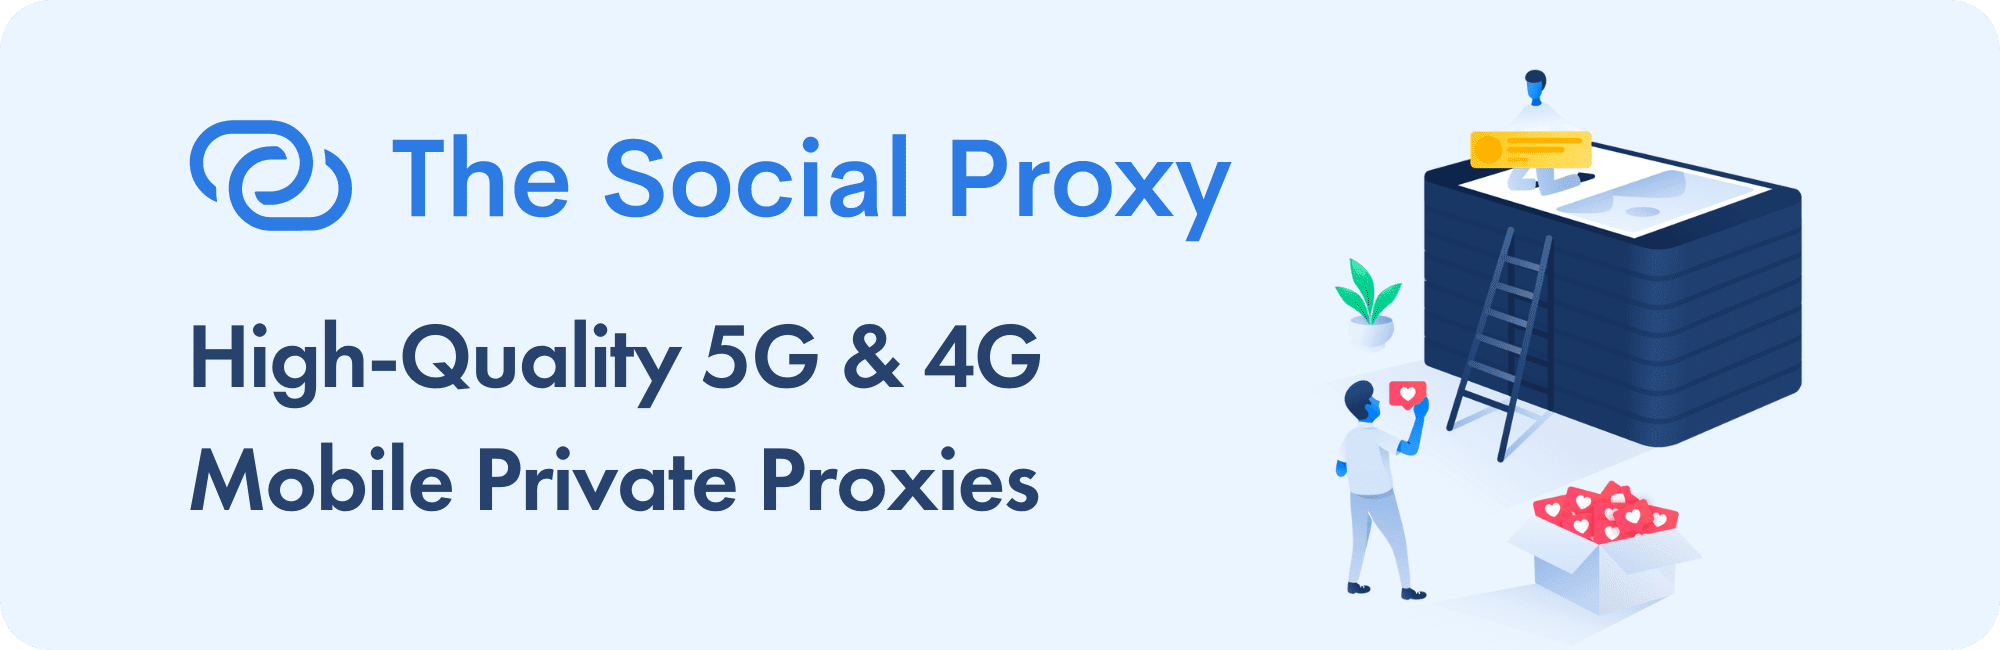 The Social Proxy Referral Badge